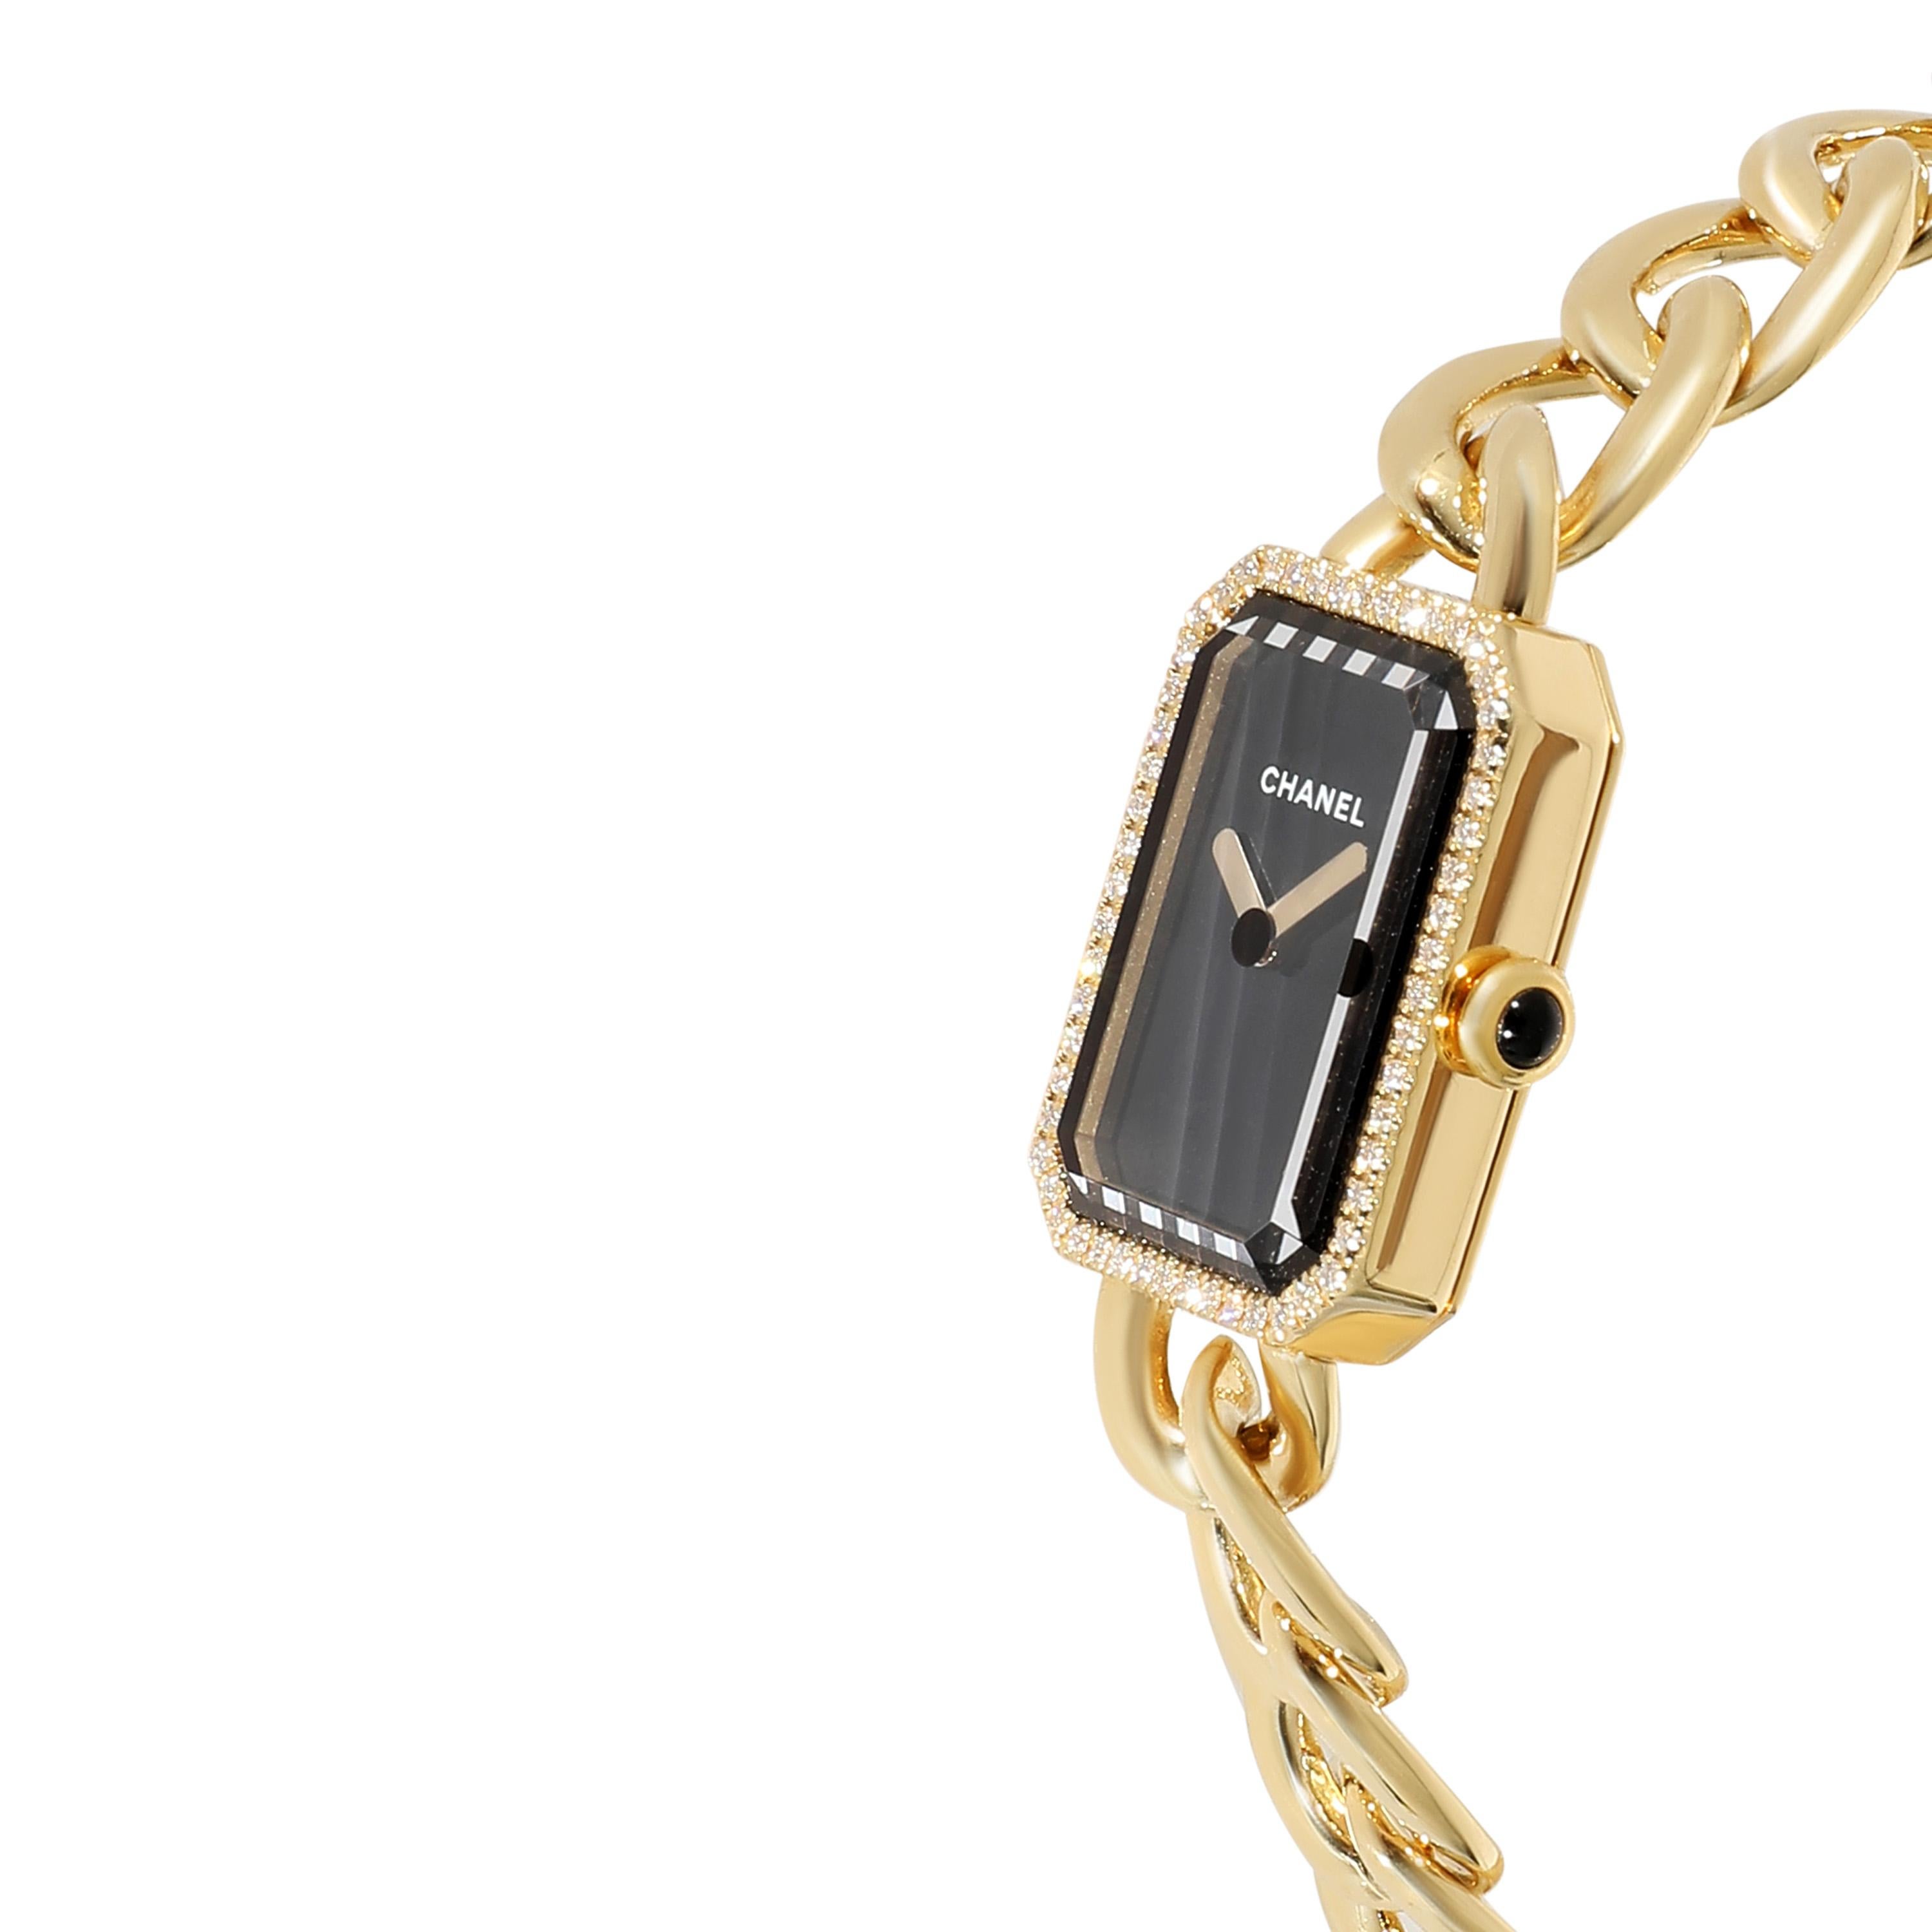 Chanel Premiere Chaine H03258 Women's Watch in 18kt Yellow Gold In Excellent Condition For Sale In New York, NY